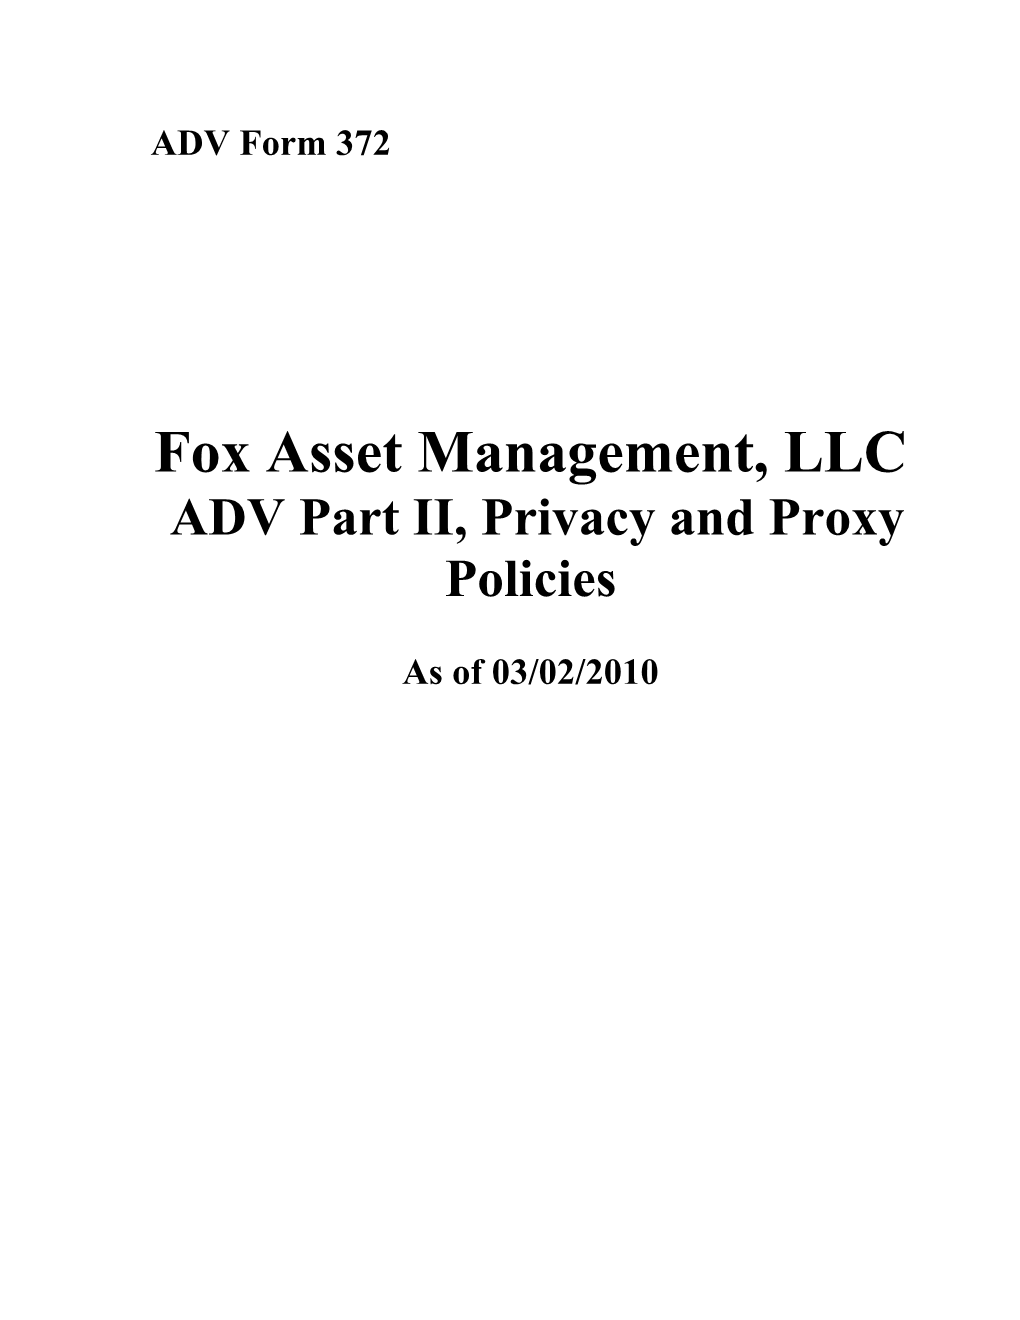 Fox Asset Management, LLC ADV Part II, Privacy and Proxy Policies